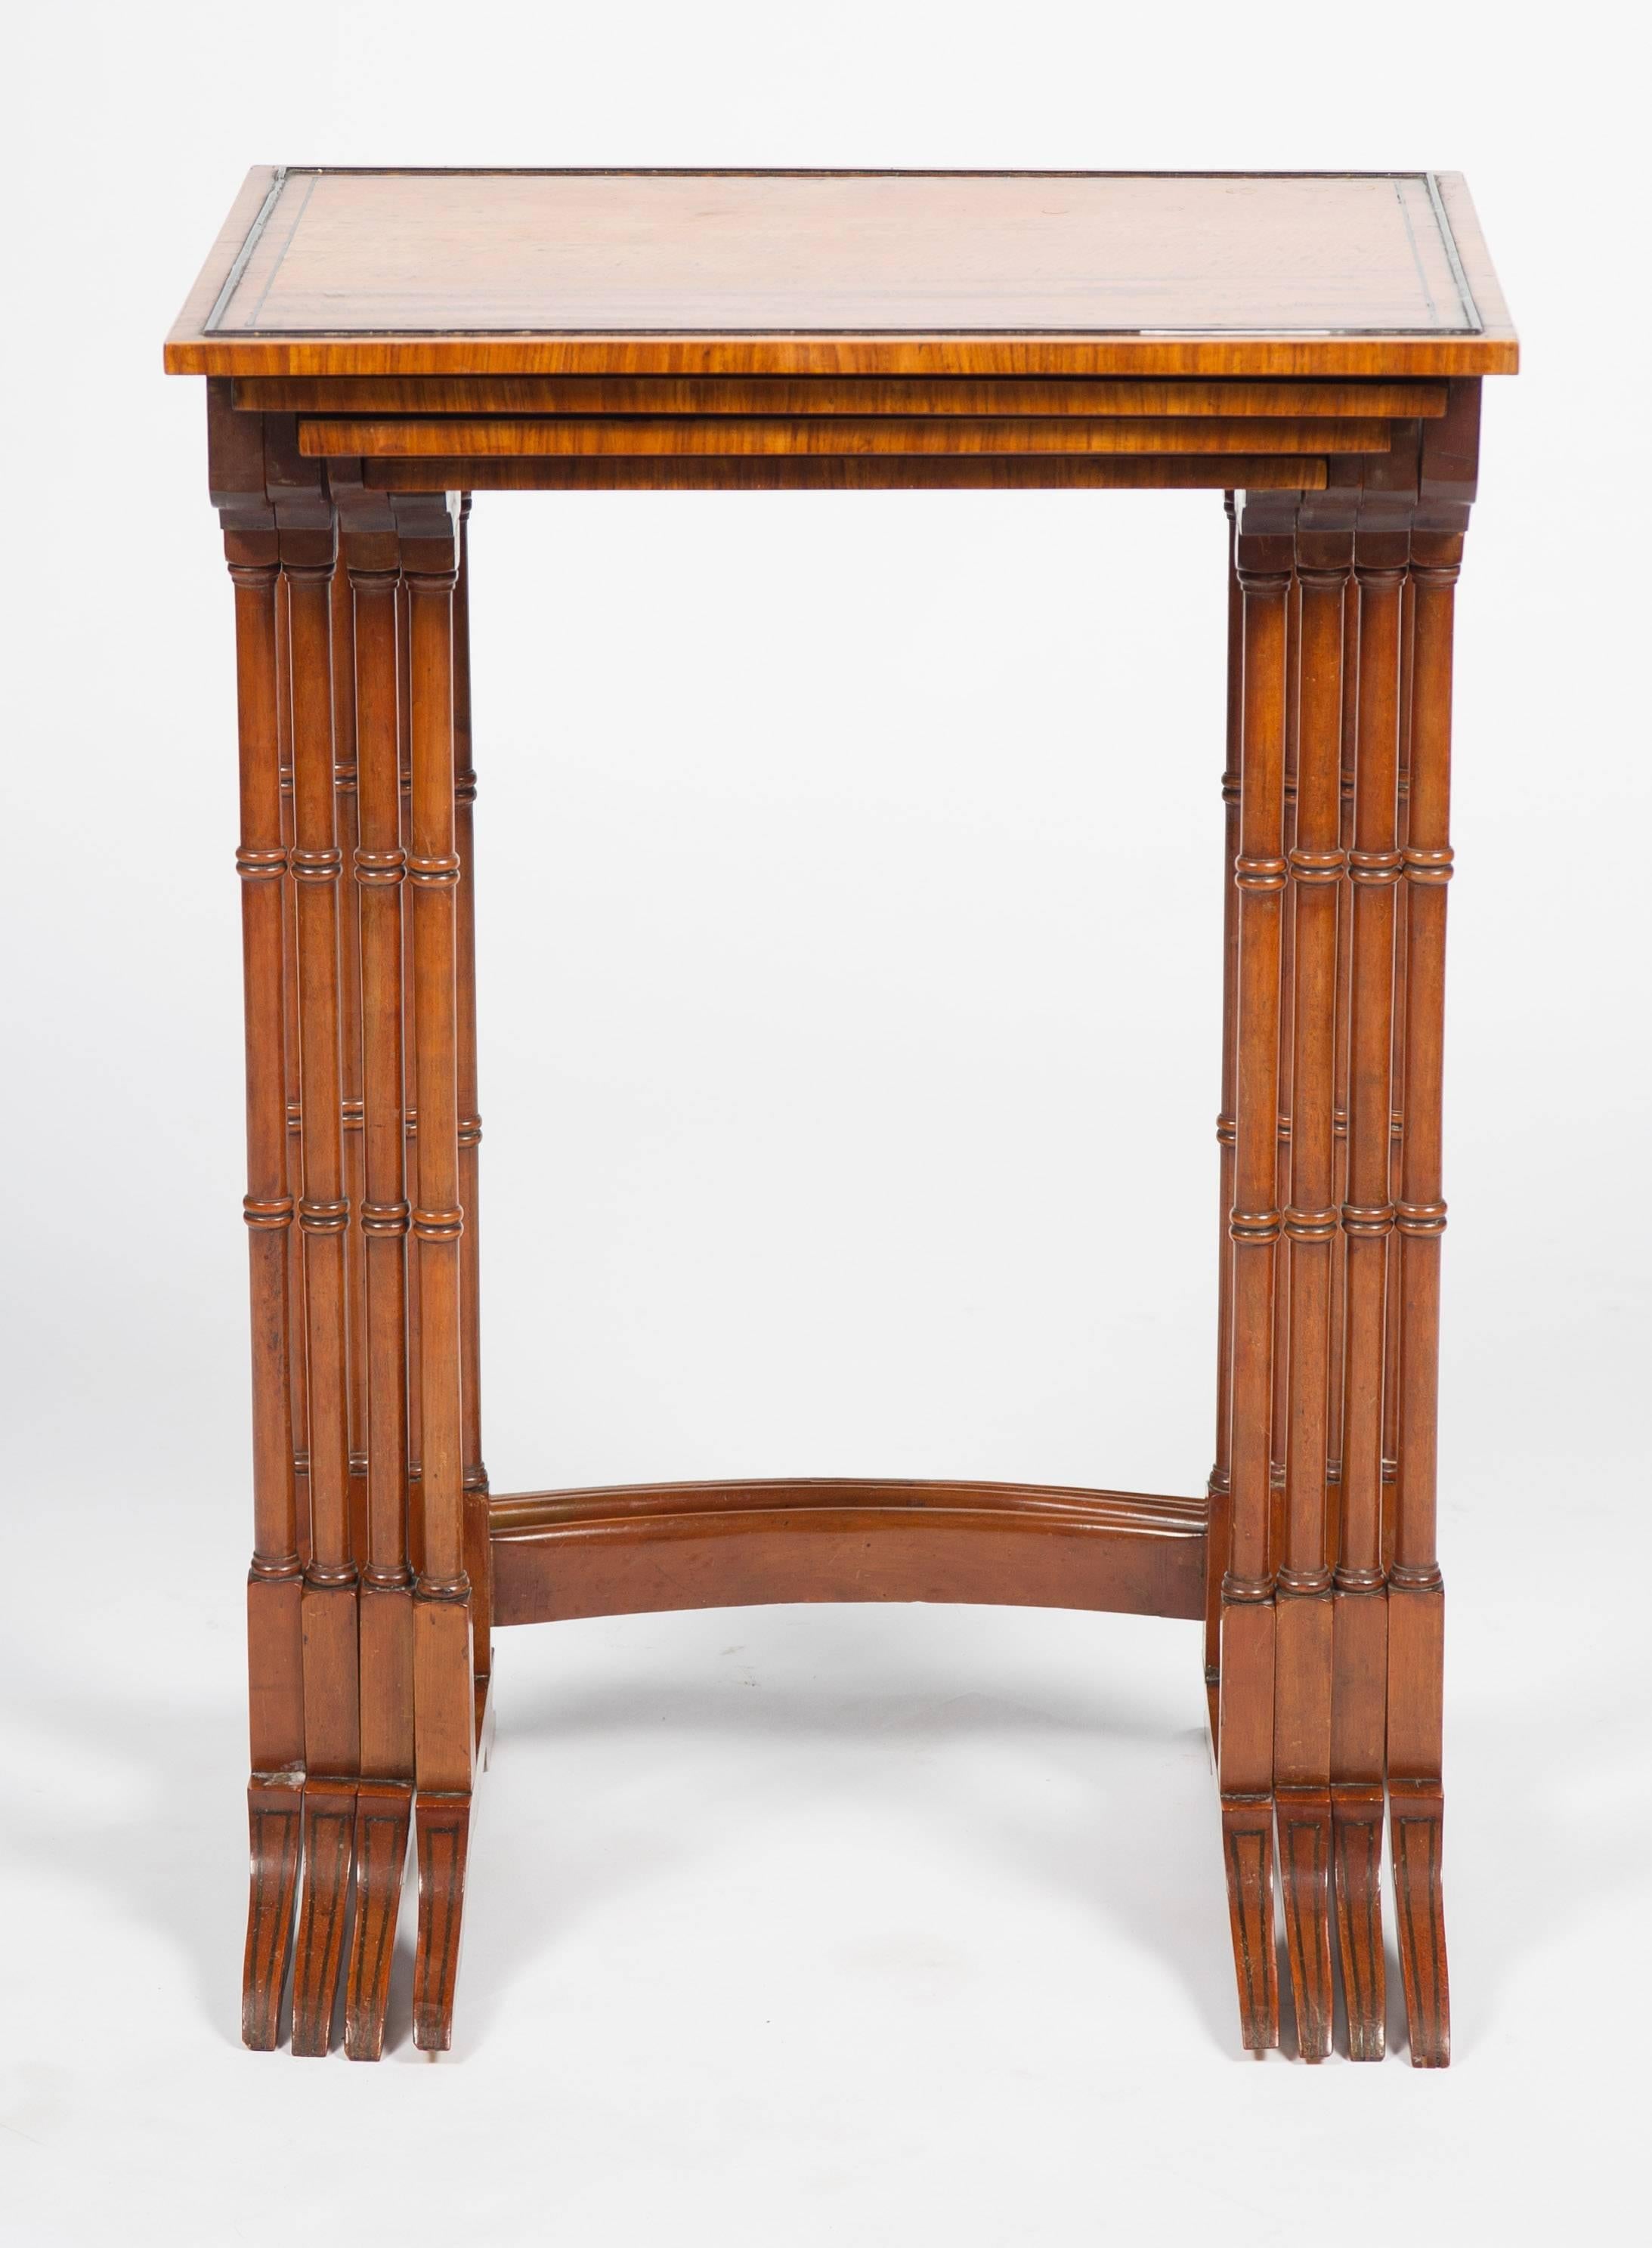 Avery good quality nest of four 19th century satinwood tables, each with ebony string inlay. The legs with ring turnings and united by a curved stretcher below, terminating on out swept feet.